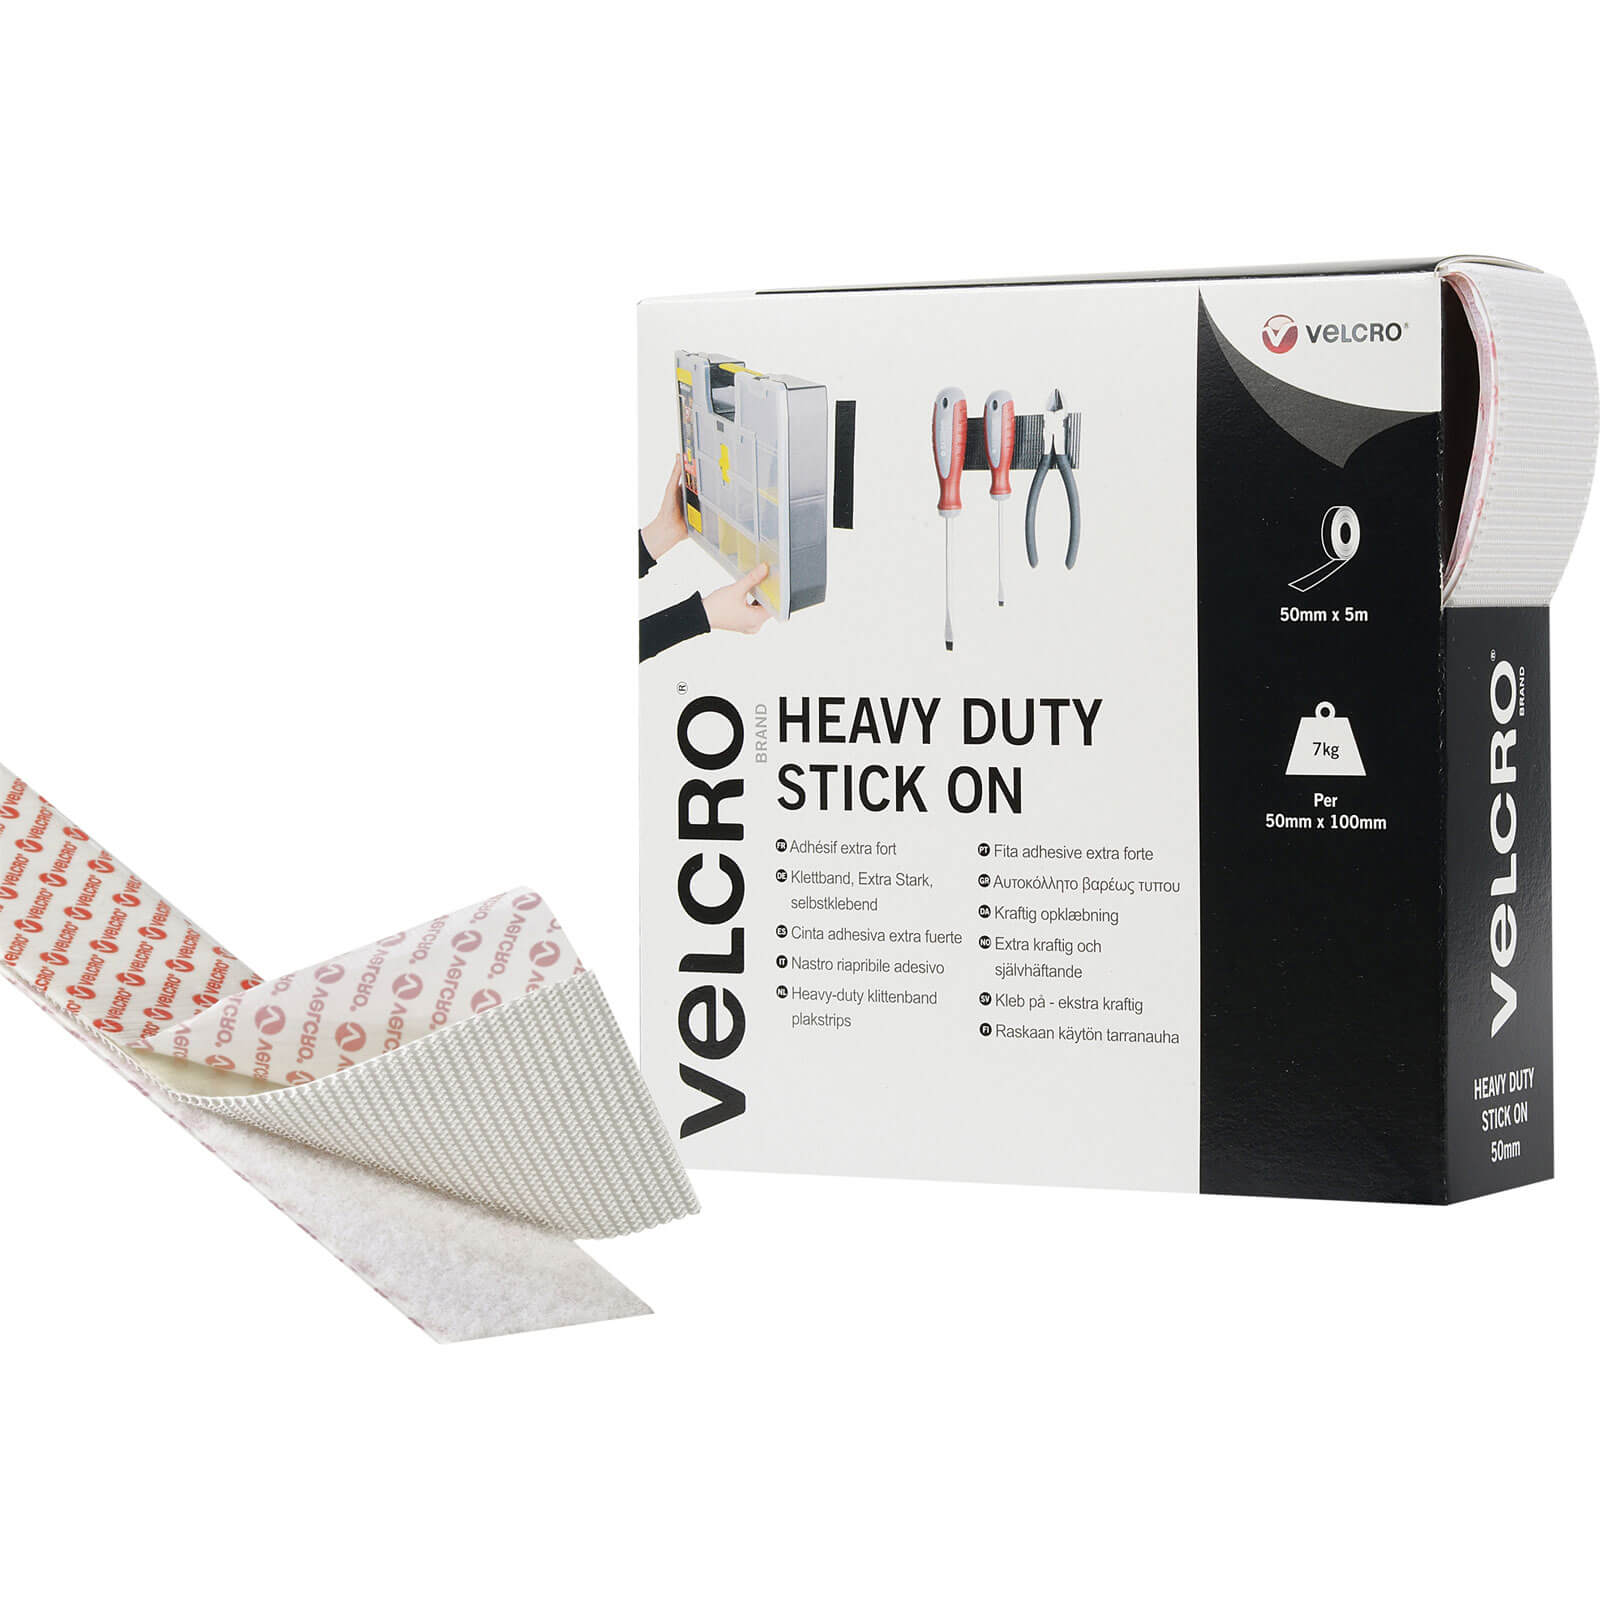 Image of Velcro Heavy Duty Stick On Tape White 50mm 5m Pack of 1